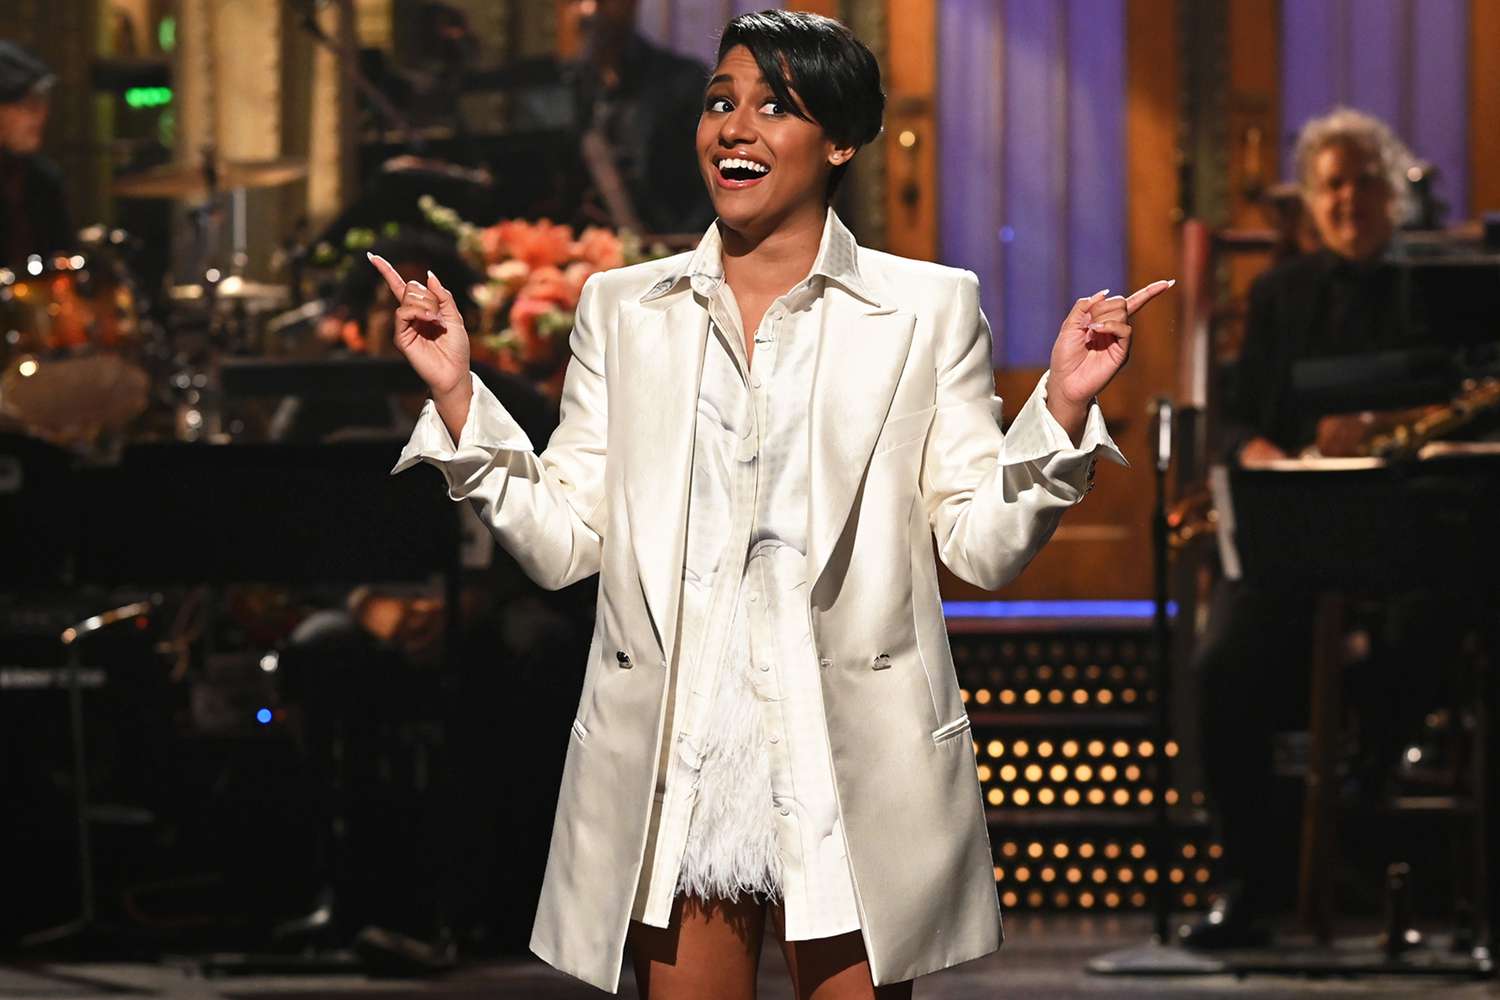 SATURDAY NIGHT LIVE Ariana DeBose, Bleachers Episode 1815 Pictured: Host Ariana DeBose during the Monologue on Saturday, January 15, 2022